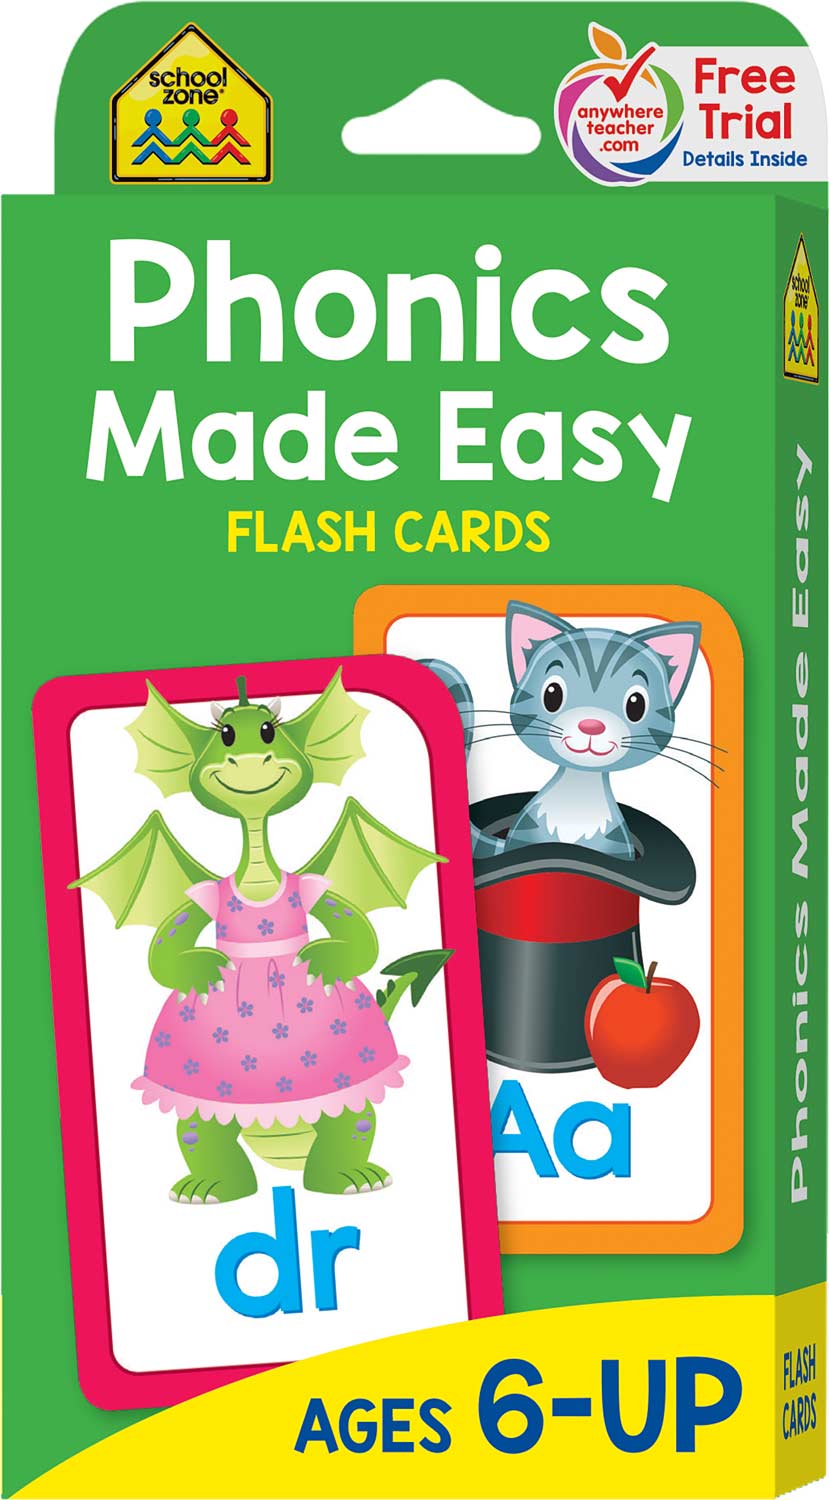 phonic-flash-cards-reading-flash-cards-by-school-zone-raff-and-friends